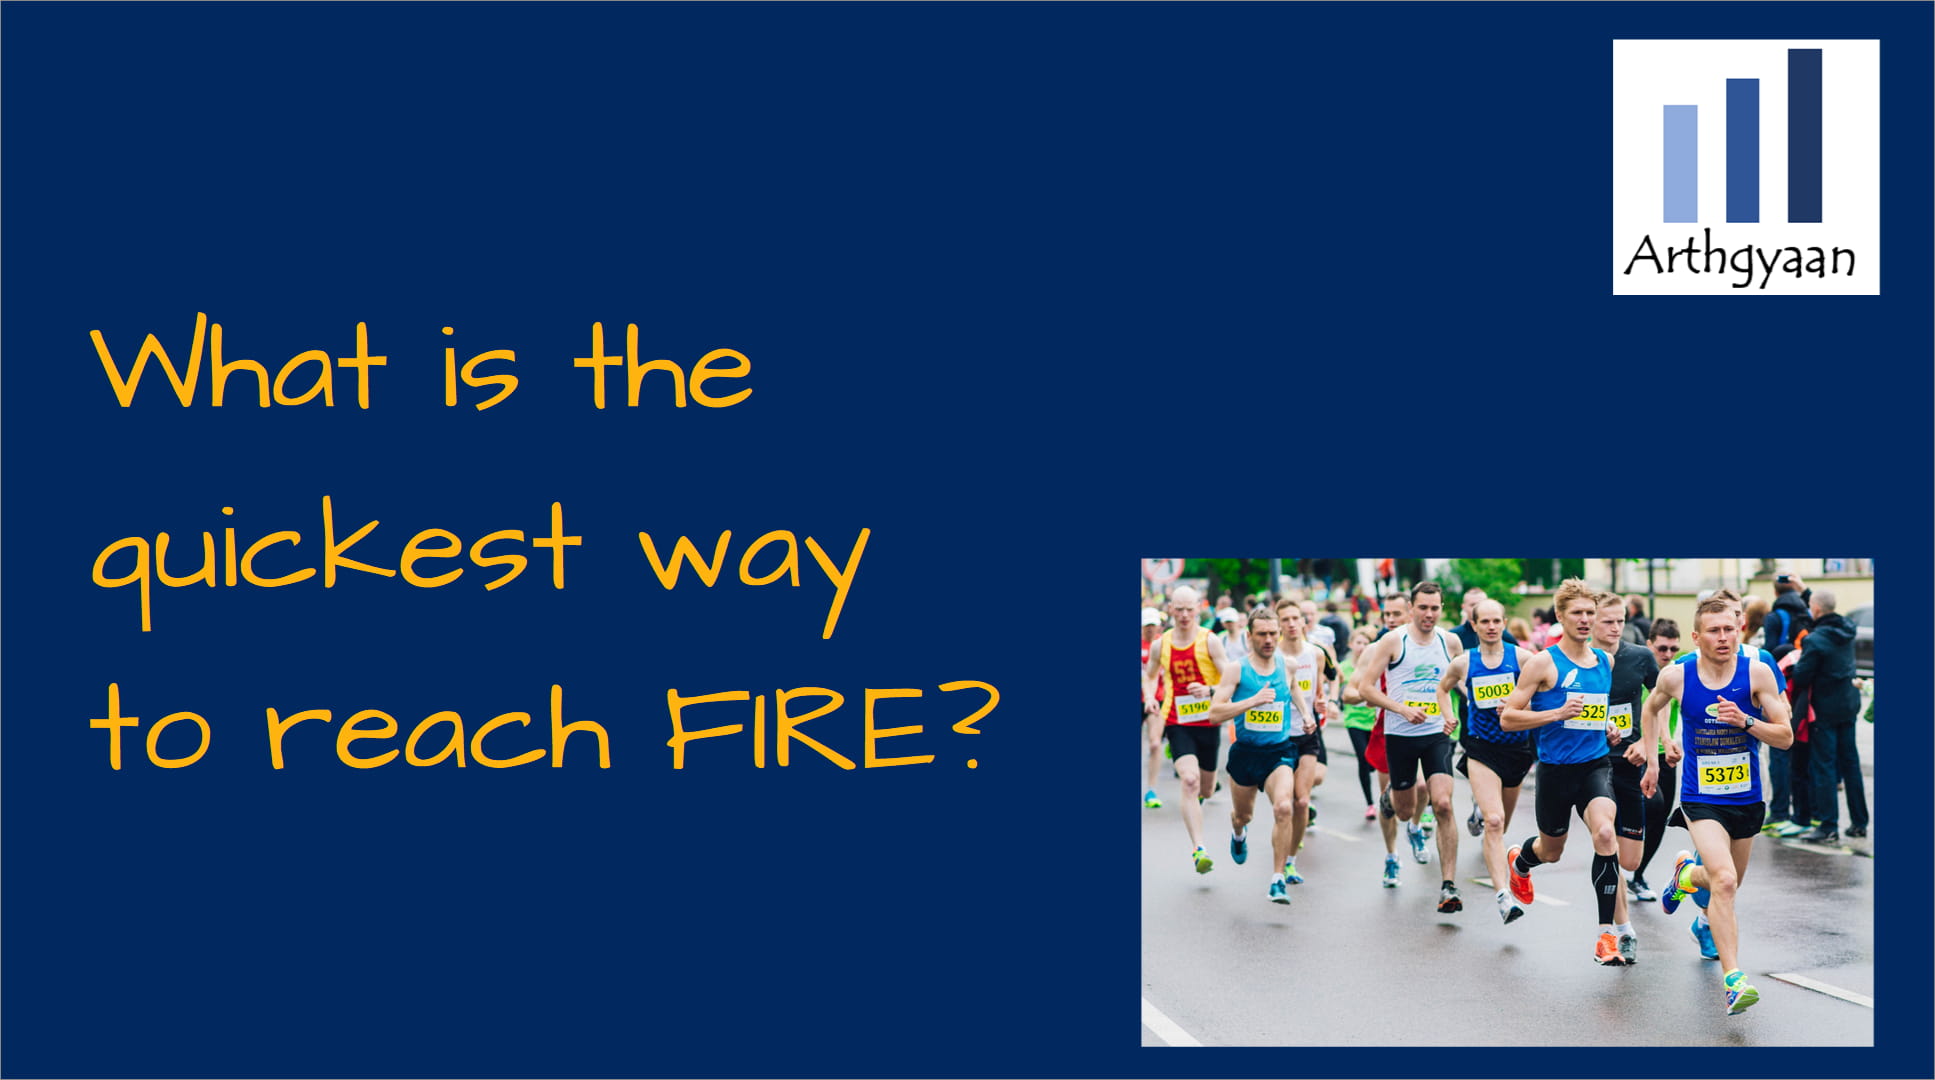 What is the quickest way to reach FIRE?